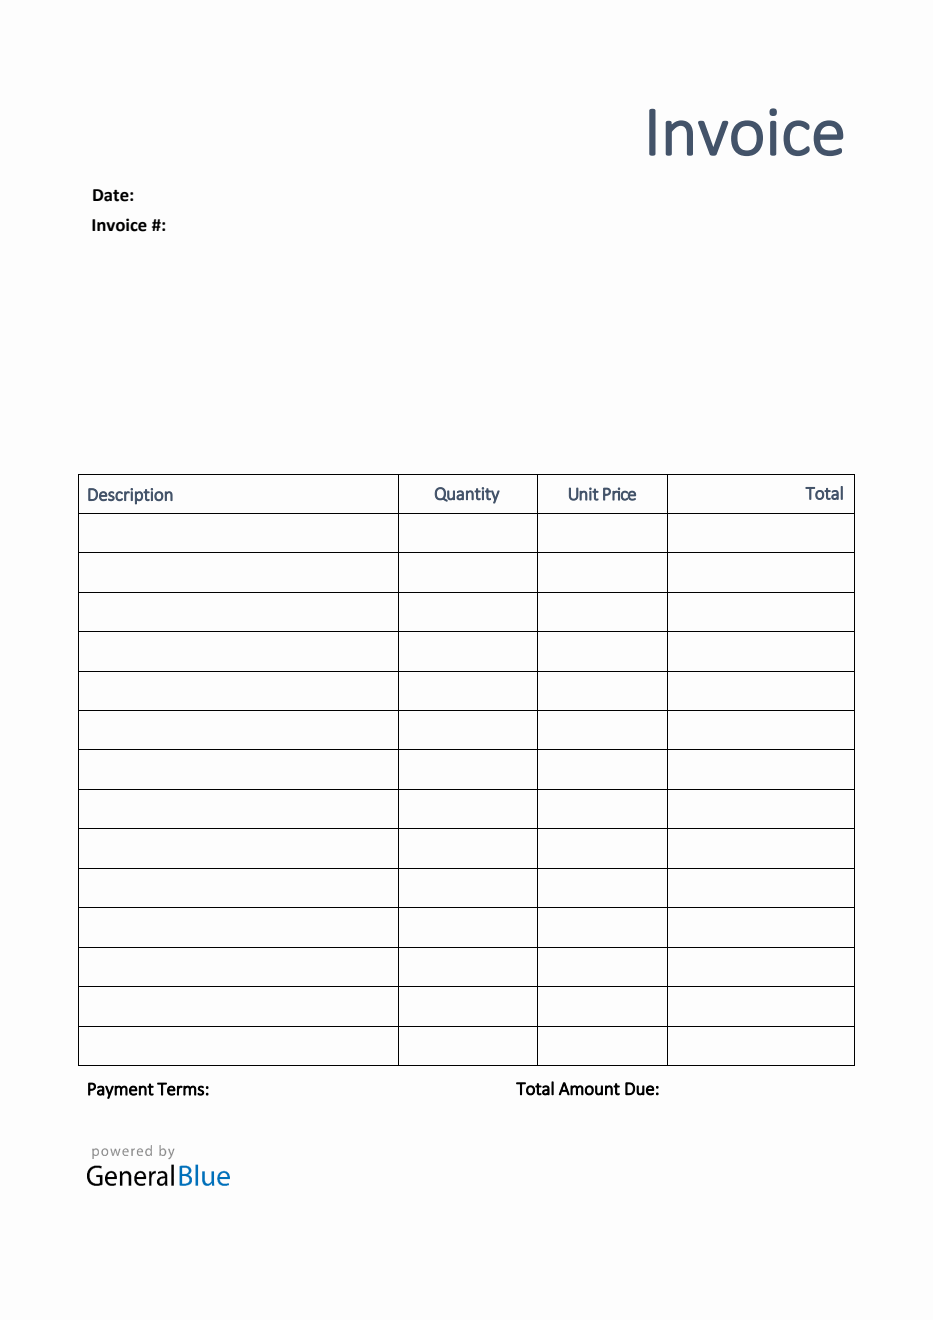 Free Printable Invoices Uk - FREE PRINTABLE TEMPLATES Pertaining To Self Employed Invoice Template Uk